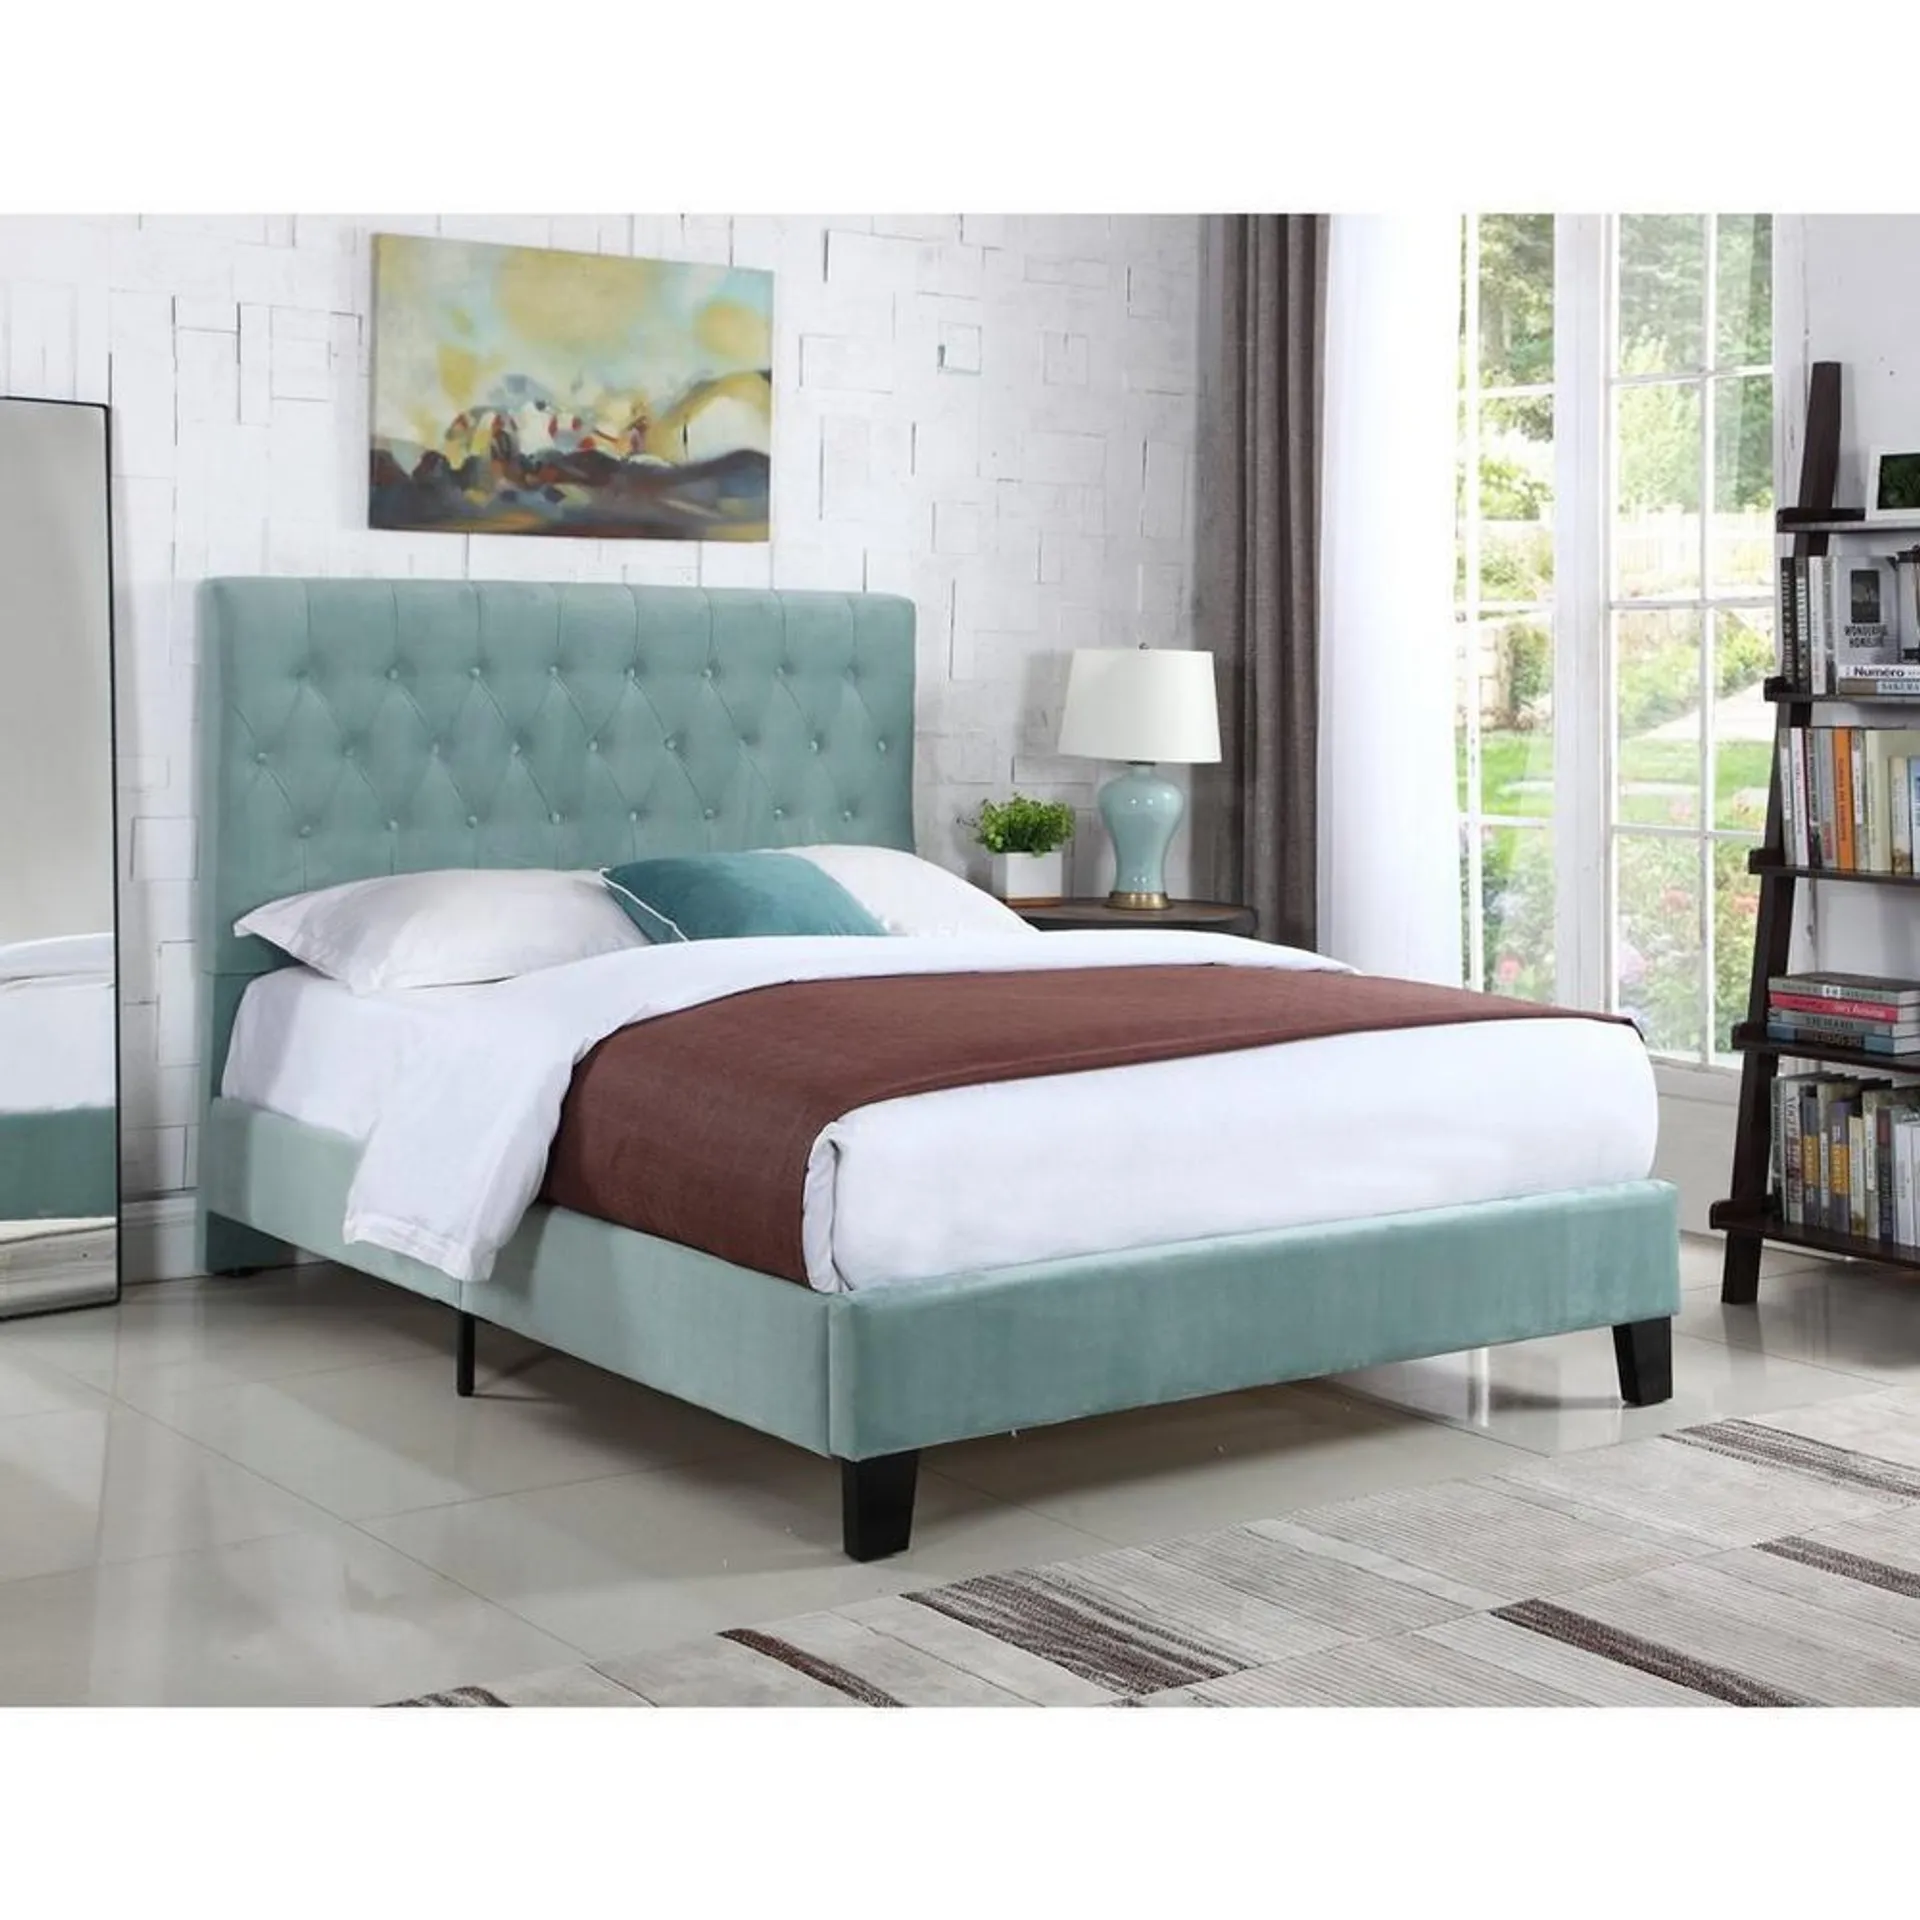 Amelia Queen Upholstered Bed w/ 12" Plush Pillow Top Mattress & Protector